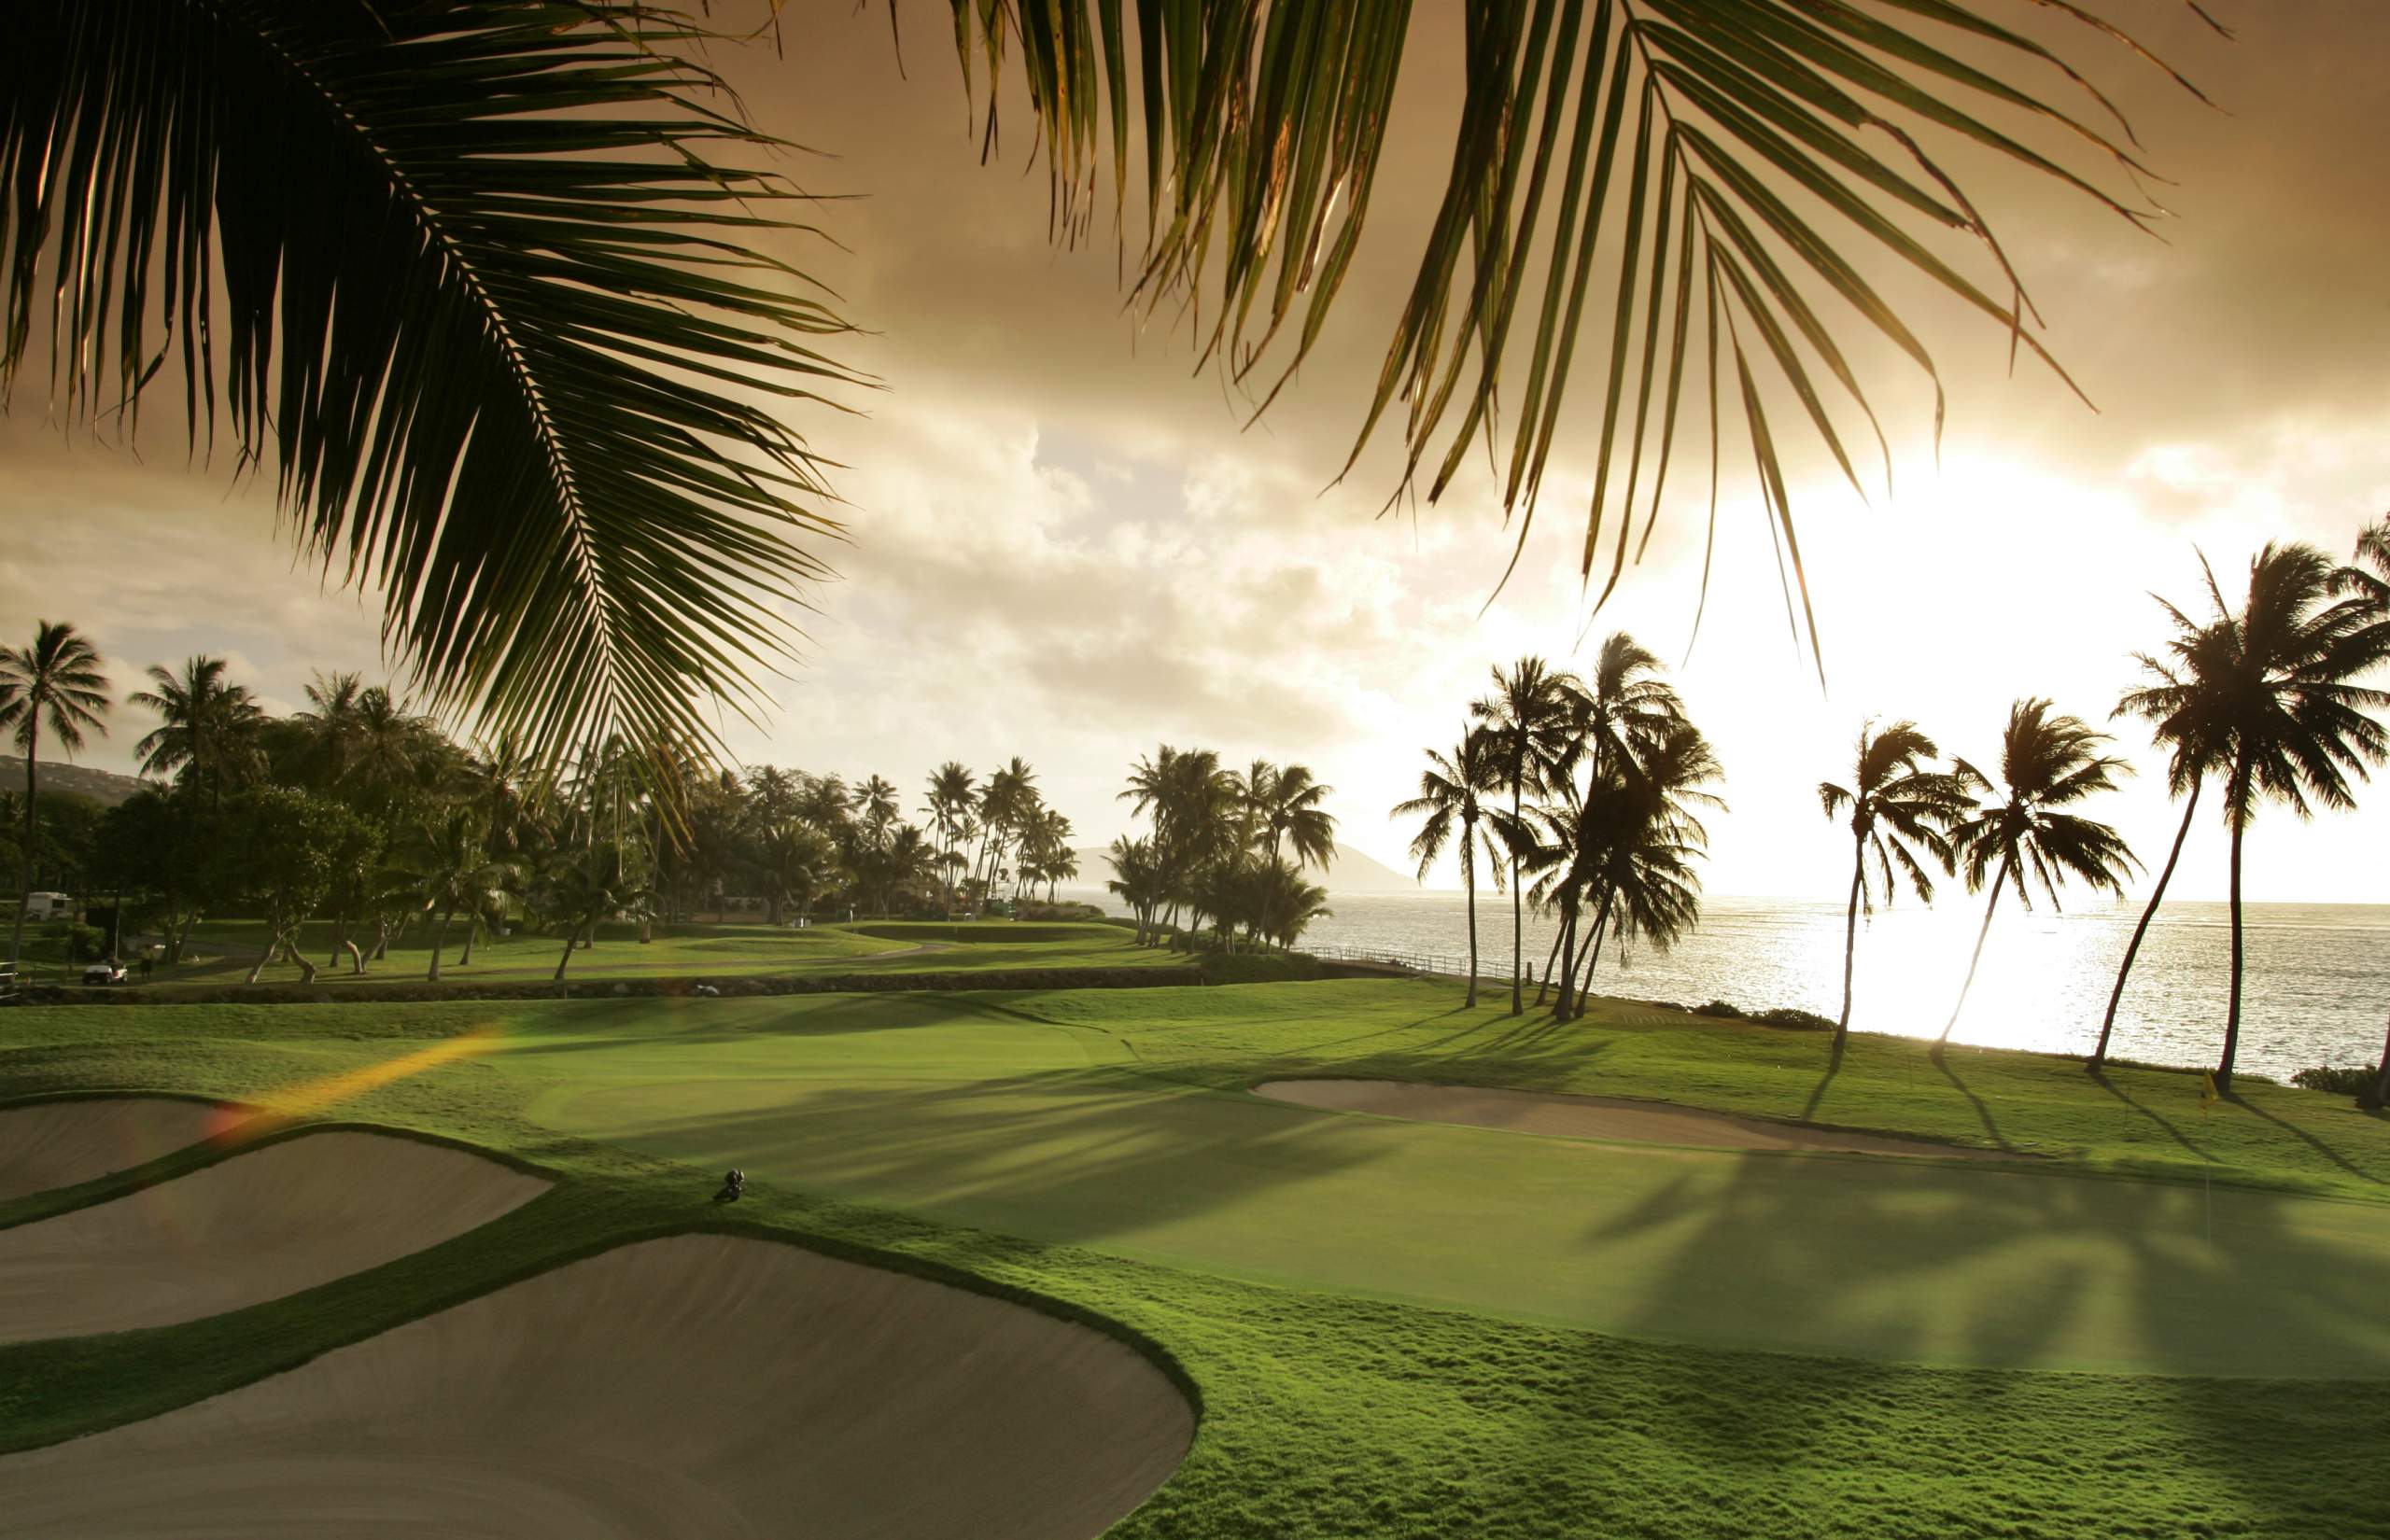 <em><b>Course Location: Honolulu, Hawaii</b></em> In an effort to bring luxury travel and trade to Hawaii, a hotel and golf course were erected on Honolulu's East side. In 1927, a golfing oasis emerged. Helmed by architect Seth Raynor, Waialae Golf Course was built, drawing inspiration from golfing meccas around the globe. The par three 13th is designed from one on the Biarritz Course in France. Meanwhile, the 8th hole pays homage to the iconic Redan Hole of Scotland's North Berwick Course. Venturing further into the course, the unique 16th hole echoes the spirit of the National Course at Southhampton, Long Island. And the 10th Hole introduces features of the 17th or Road Hole at St. Andrews in Scotland. As if a trip to Hawaii wasn't already intriguing enough, a round at Waialae would be the experience of a lifetime.